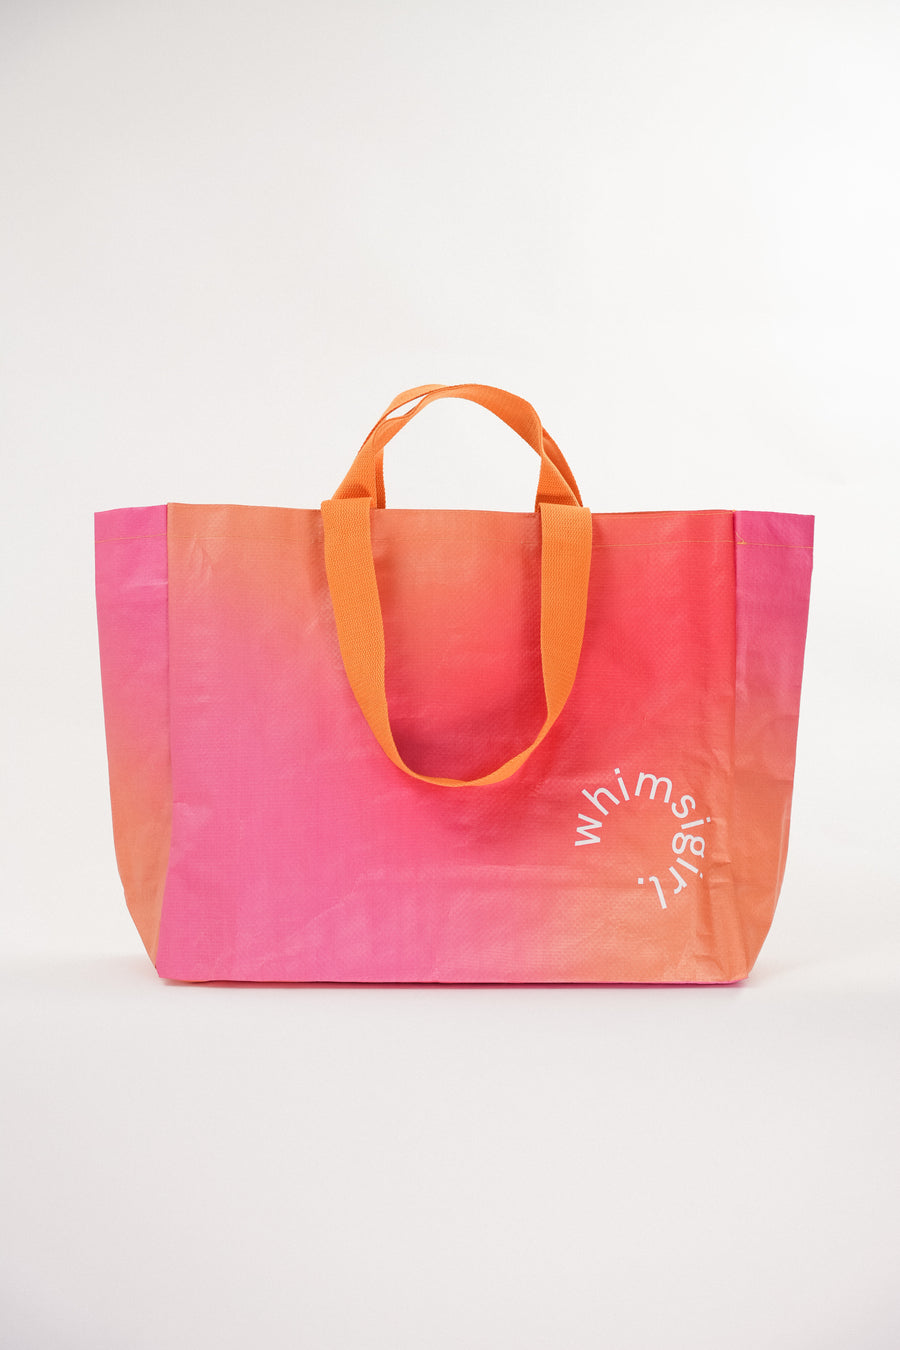 Pick-Me-Up Tote in Sunset Heat